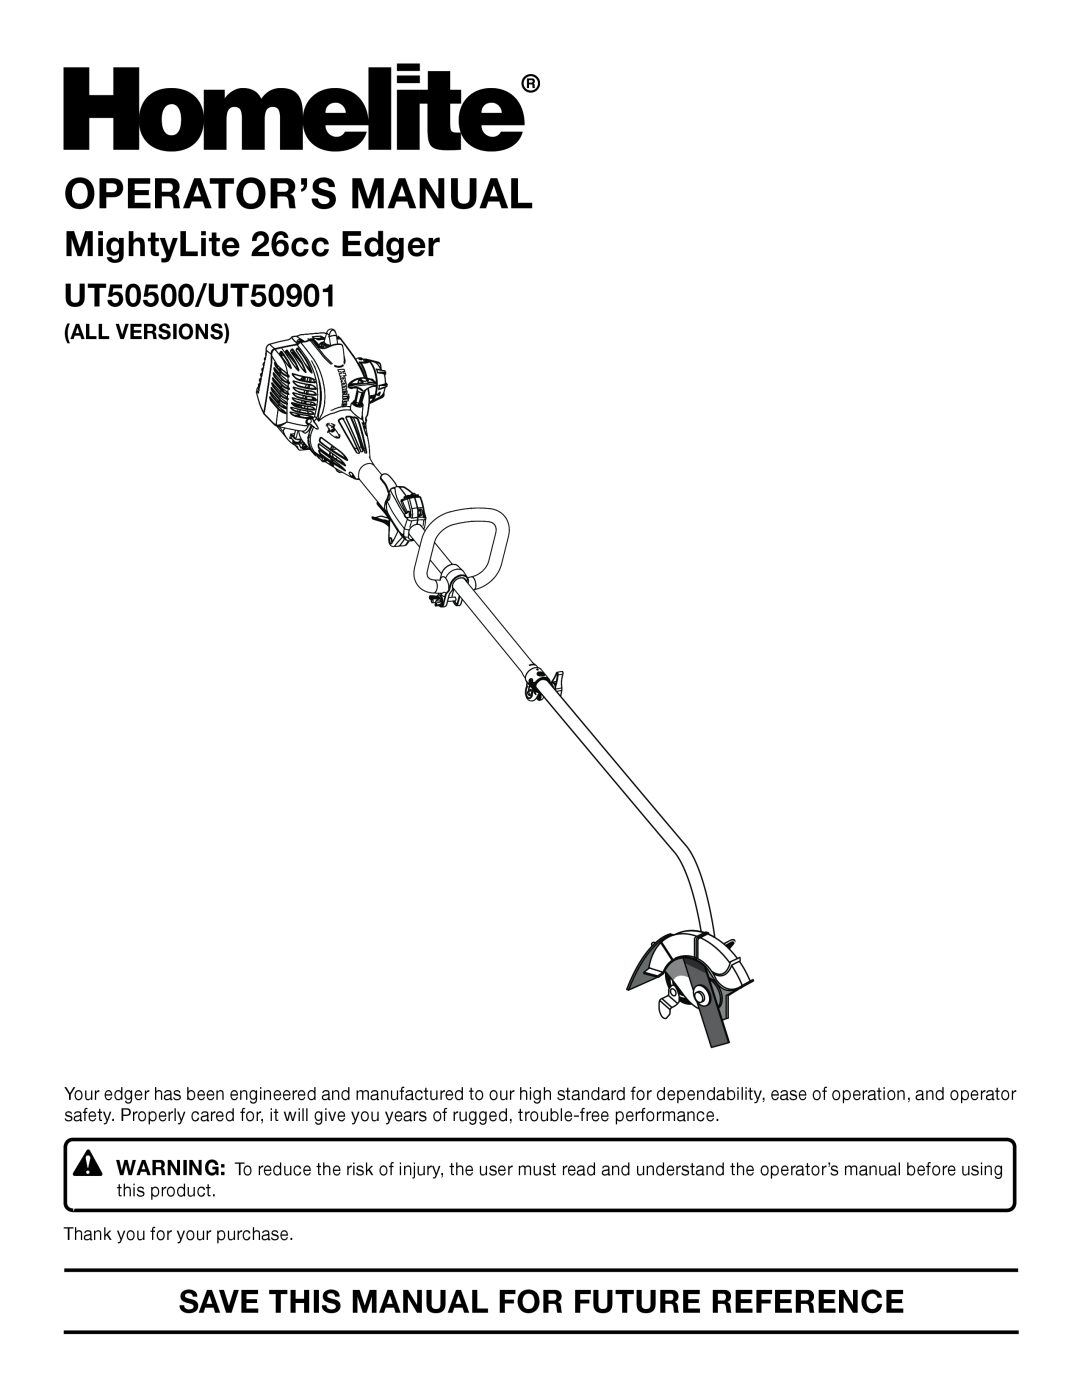 Homelite manual Operator’S Manual, MightyLite 26cc Edger, UT50500/UT50901, Save This Manual For Future Reference 